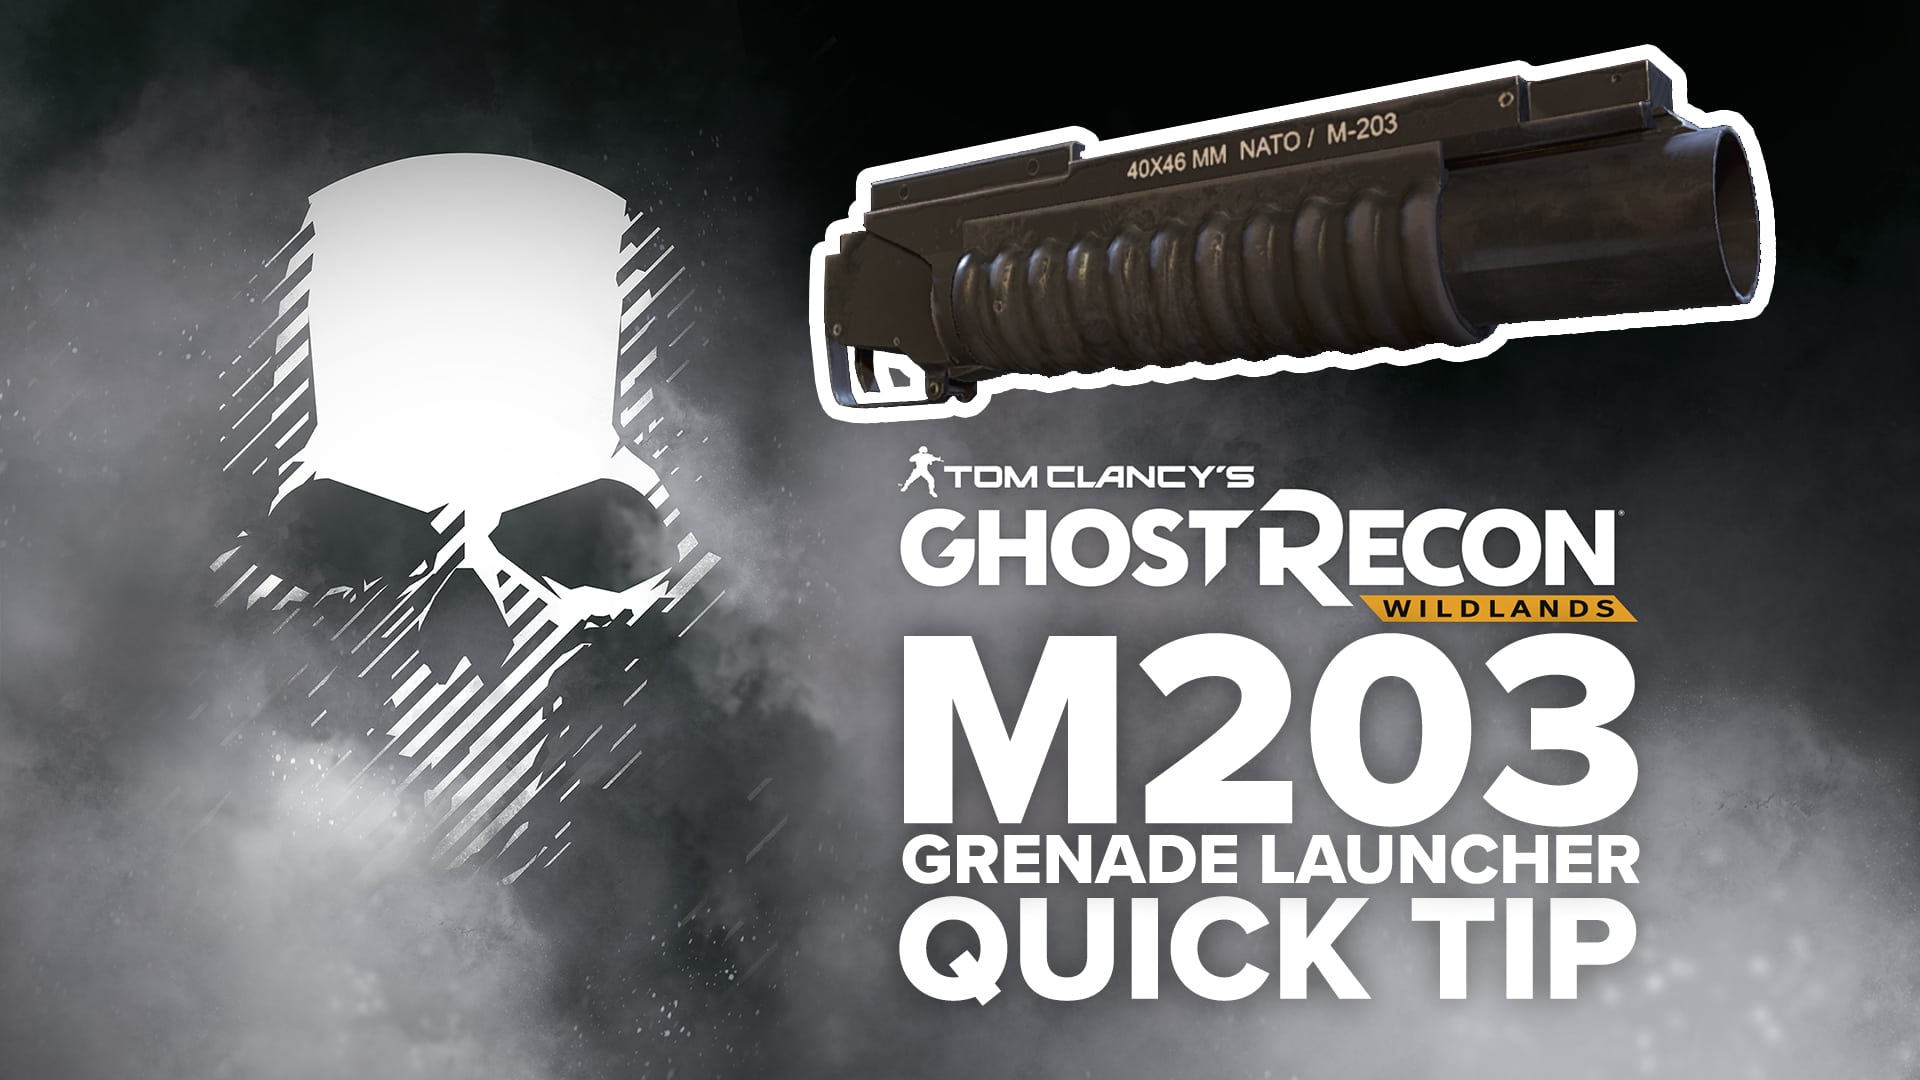 M203 Grenade Launcher Location And Details Quick Tip For Ghost